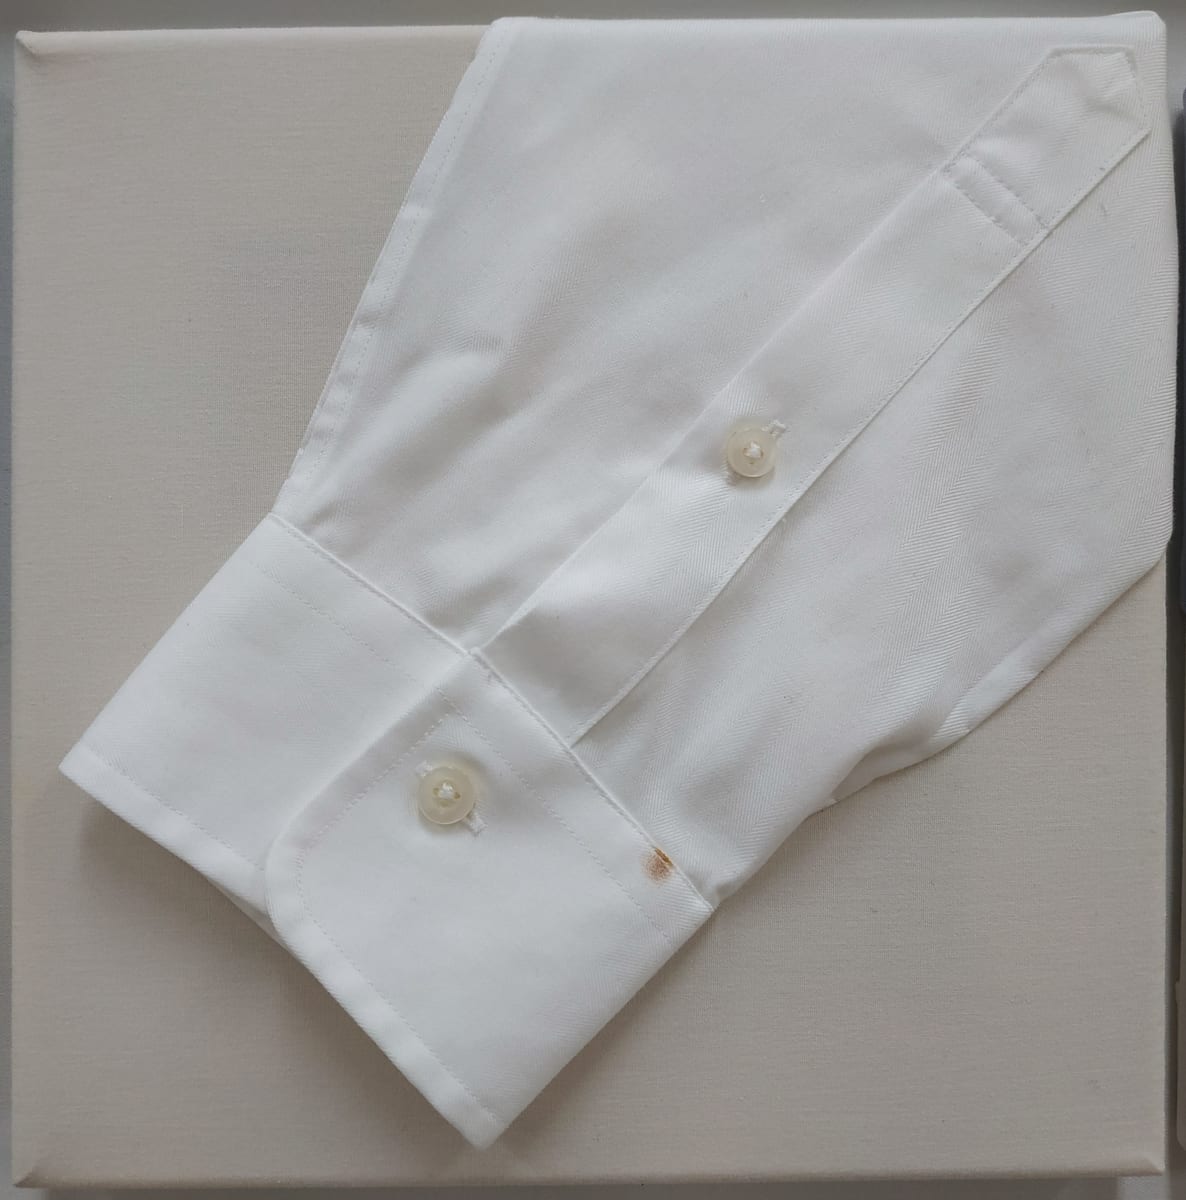 Idiom: On the Cuff by Lesley Turner  Image: Lesley Turner, 'Idiom: On the Cuff', 2020, 9"x9". Cotton shirt cuff, plastic buttons, bedsheet, polyester thread. This idiom originated from the practice of bartenders recording customers' bar tabs on their shirt cuffs.